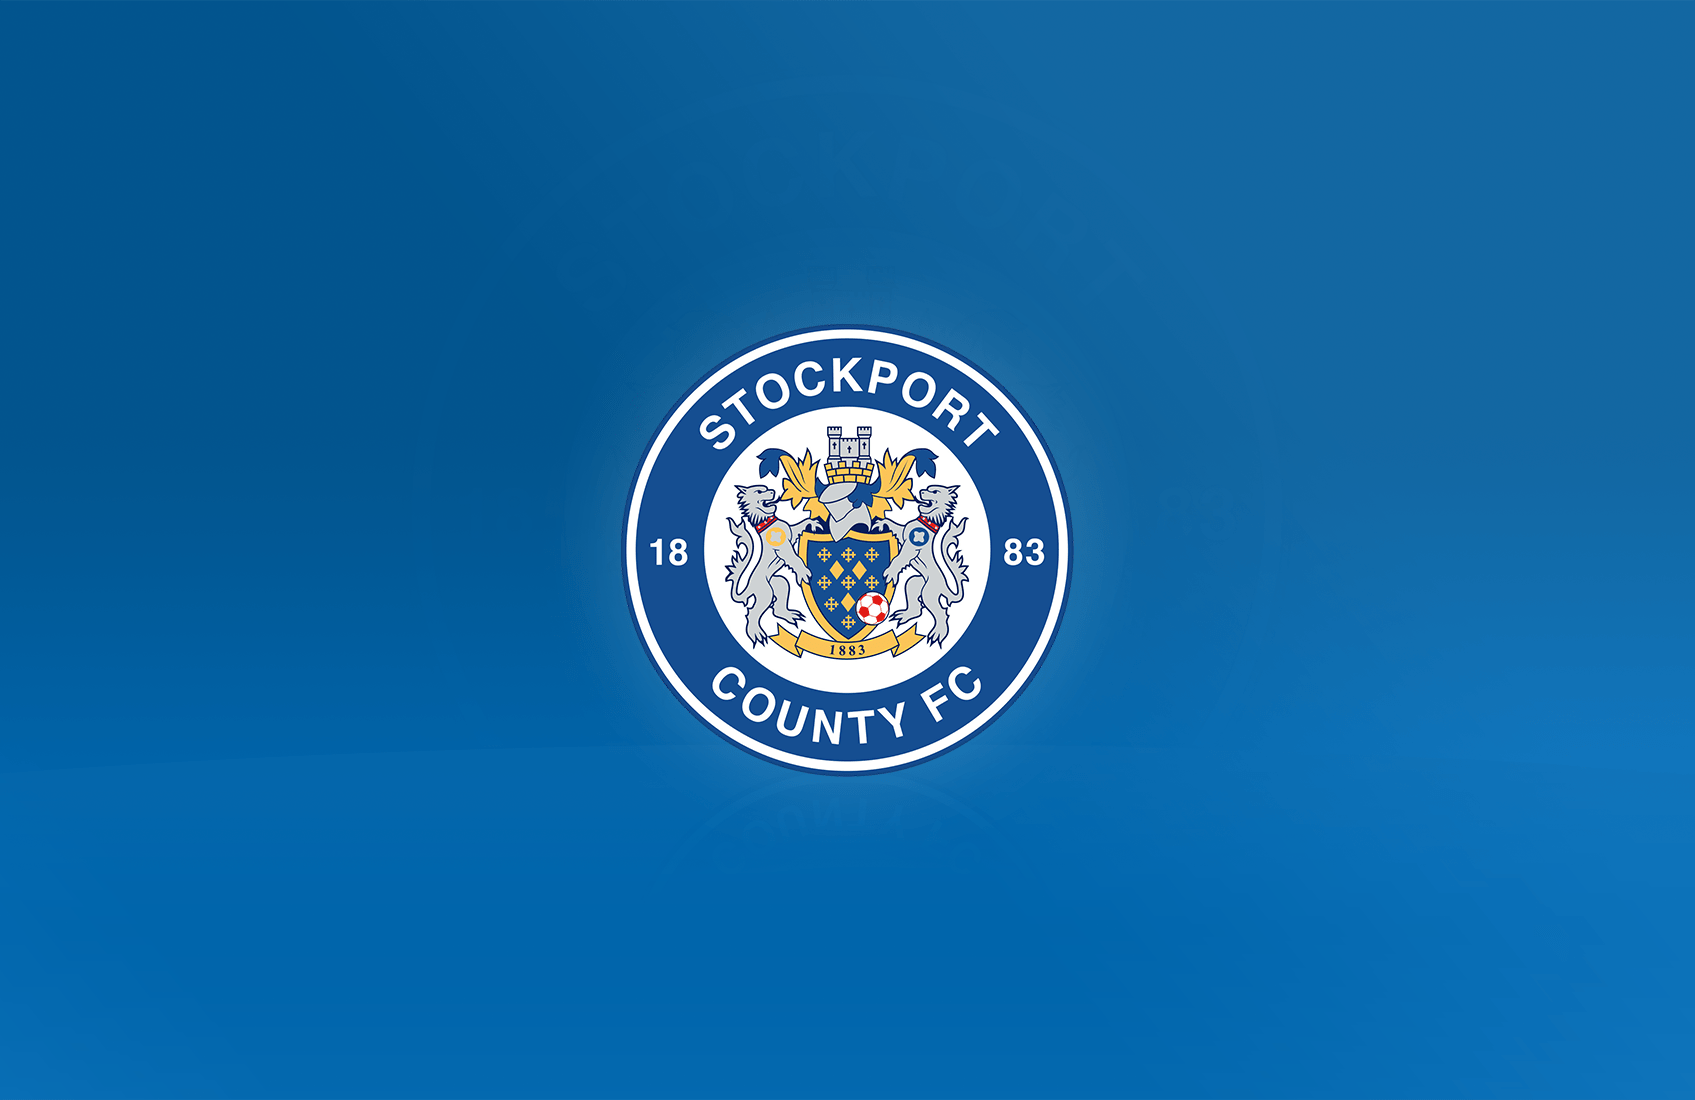 Fc Halifax Town Wallpapers